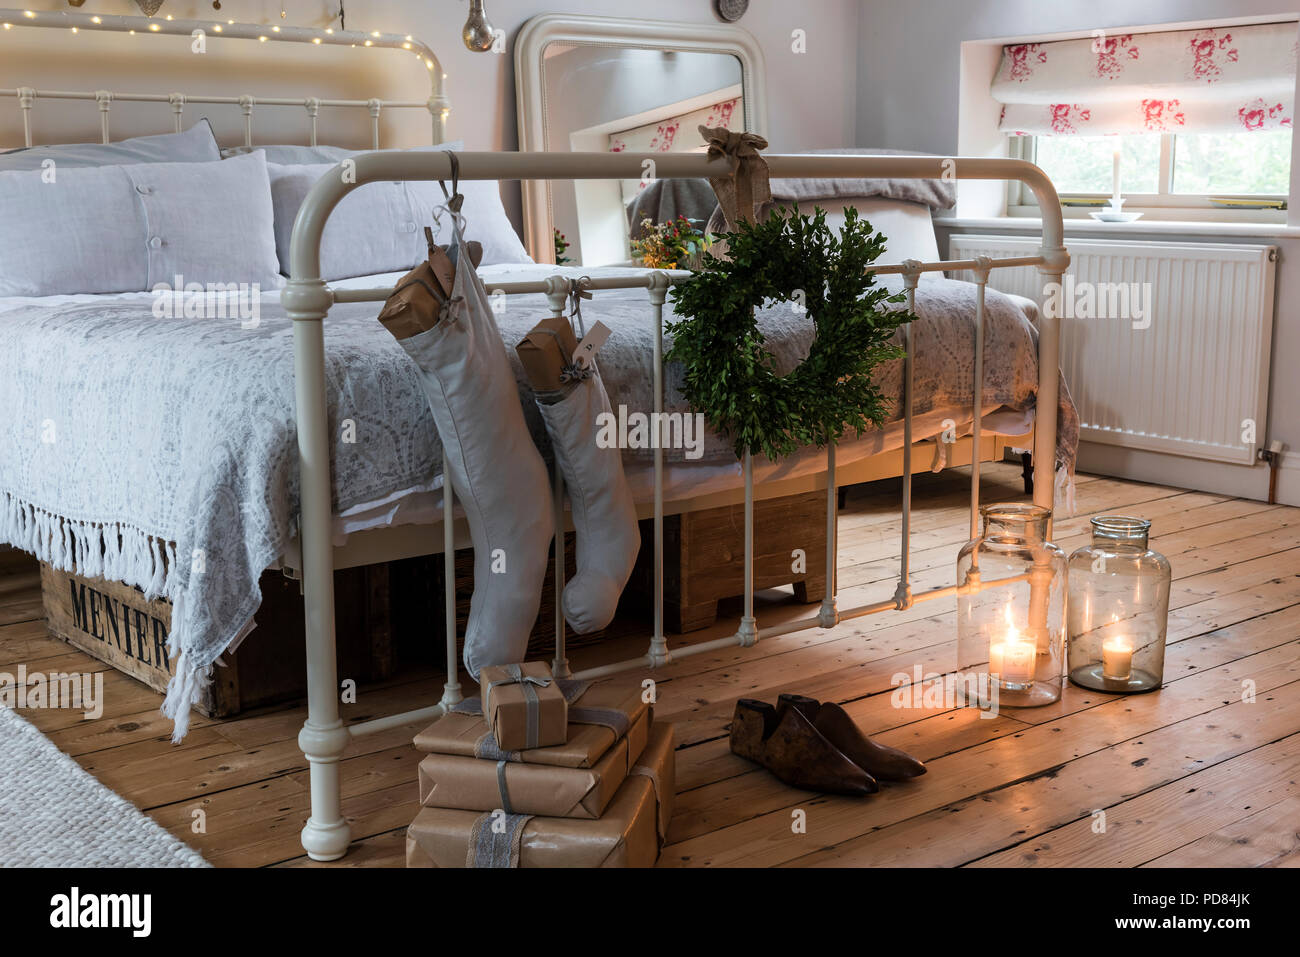 Wrapped presents, stockings and a wreath add a festive touch to a rustic bedroom. The bed is from Feather & black's with Chocolat Menier wooden boxes  Stock Photo